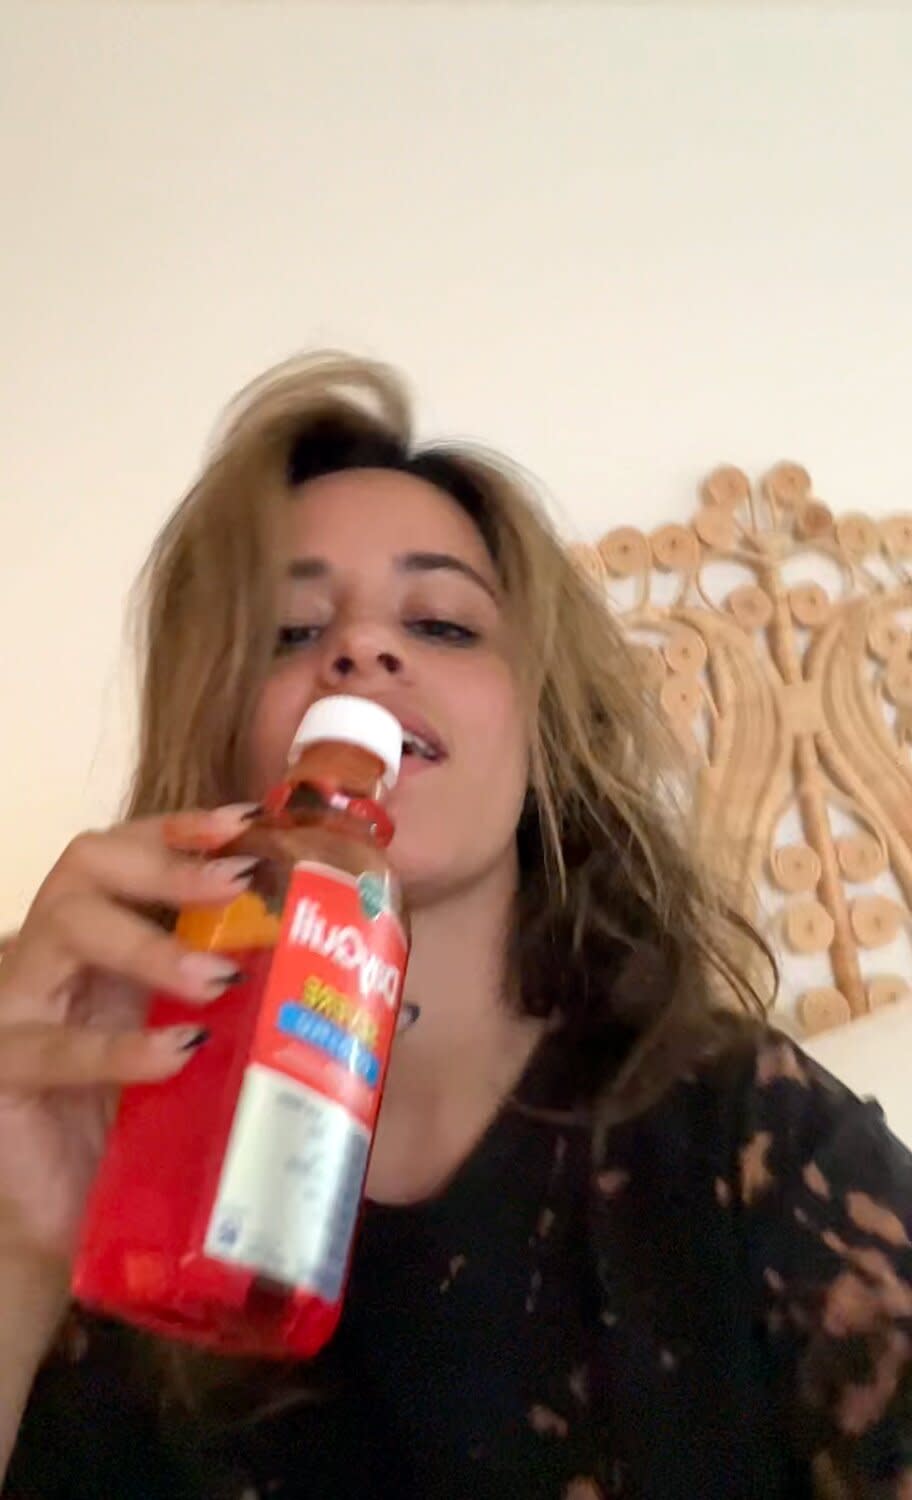 Camila Cabello Reveals She Has COVID and Dances with DayQuil in New TikTok: 'I Got the Rona'